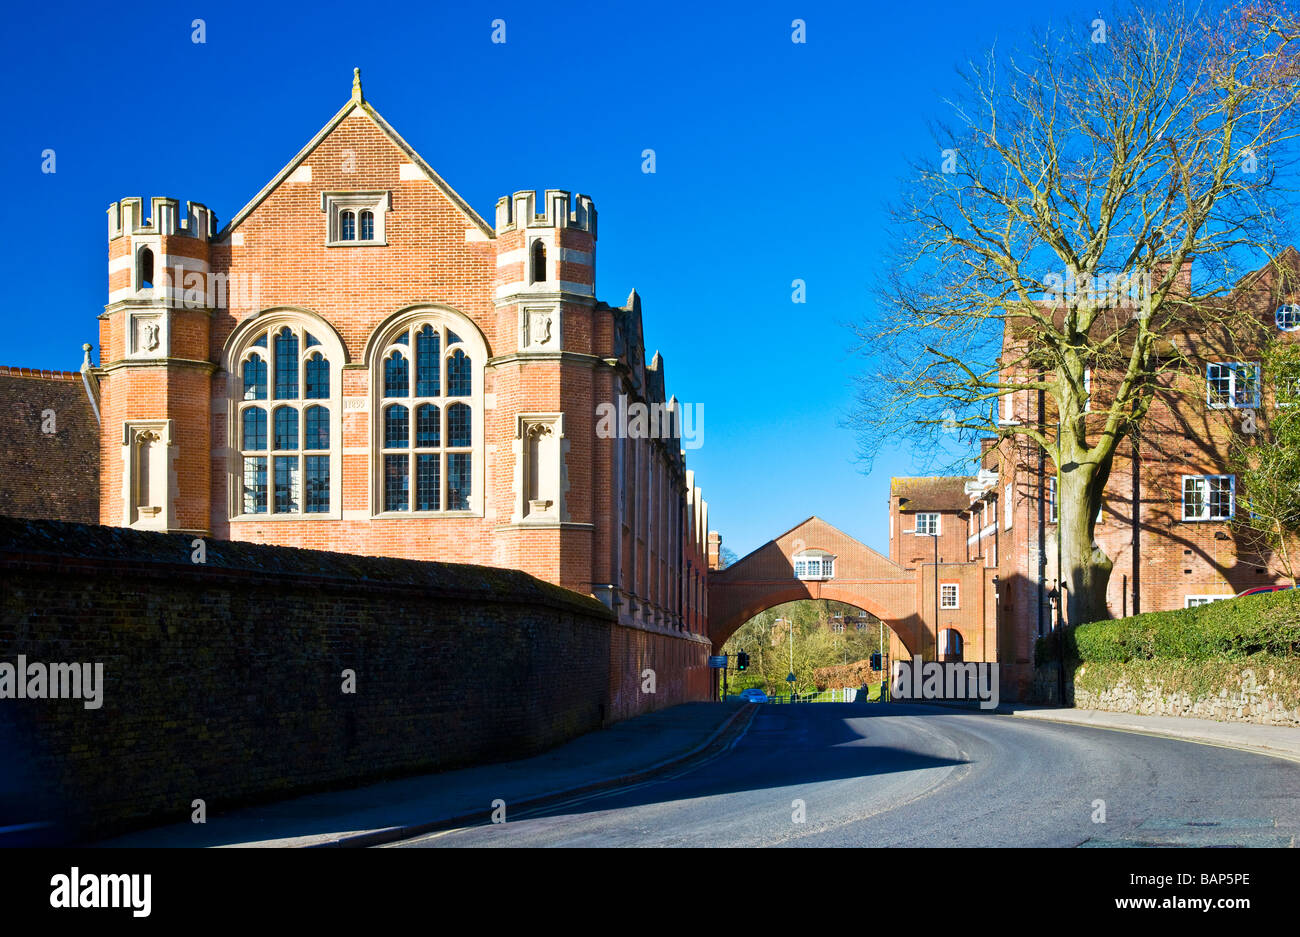 Marlborough College one of the most famous English public schools in the market town of Marlborough Wiltshire England UK Stock Photo